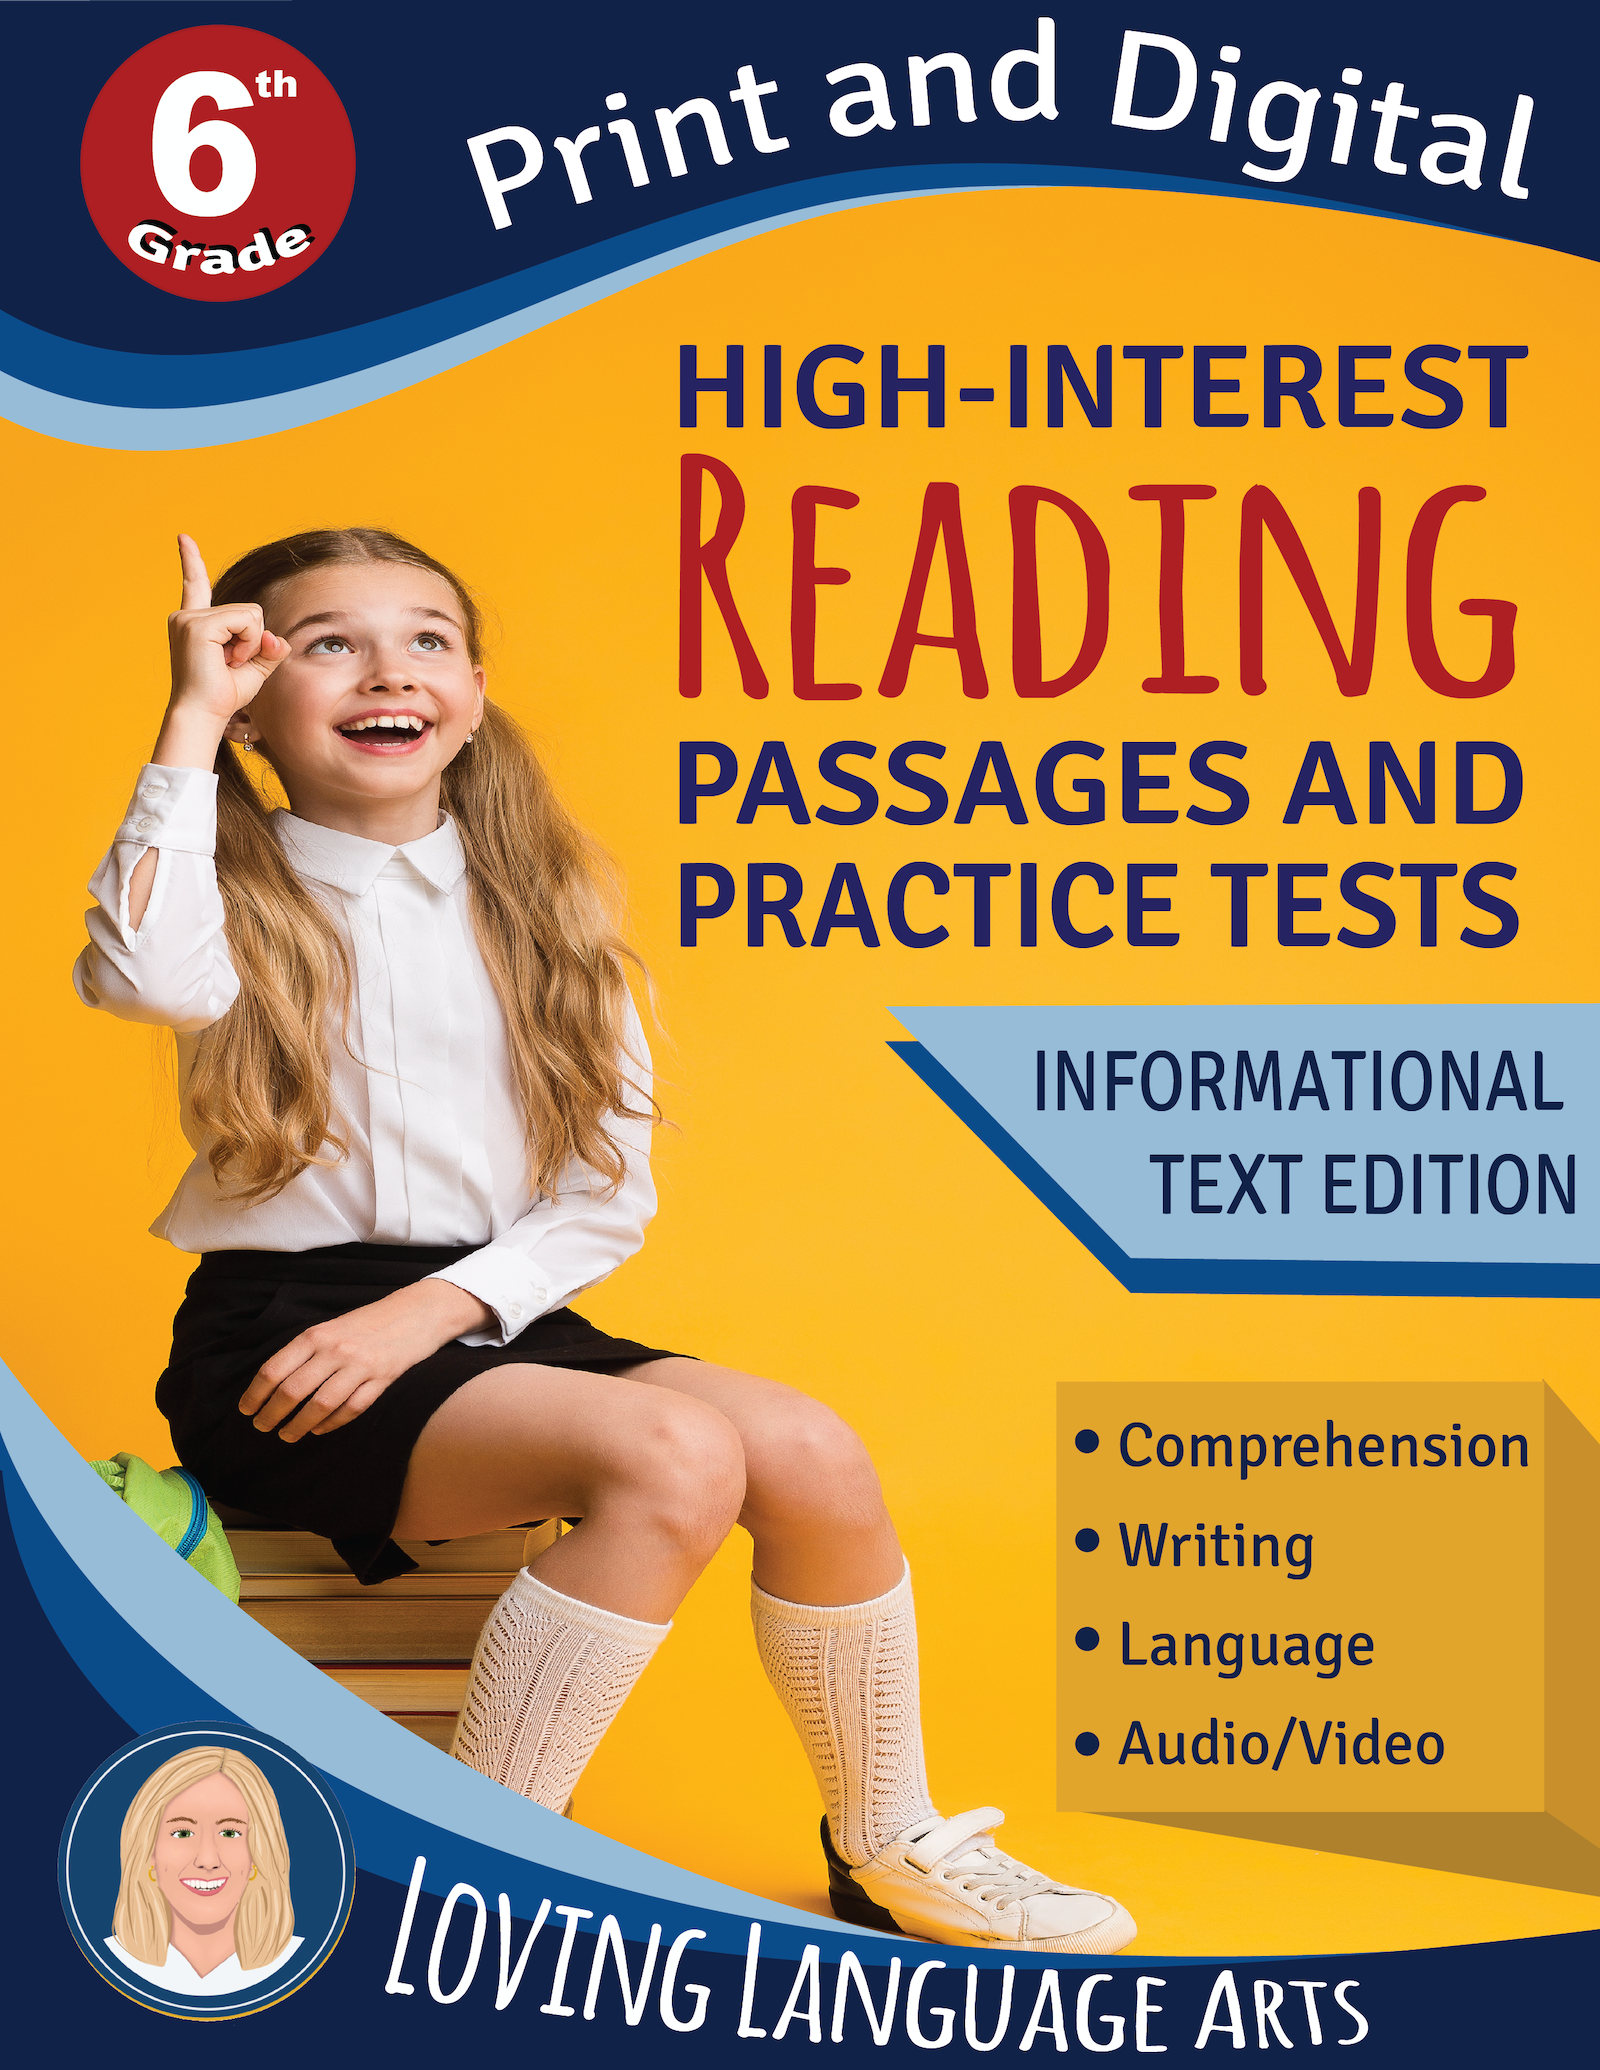 Grade 6 Reading Passages and Practice Tests Workbook - Informational Text Edition